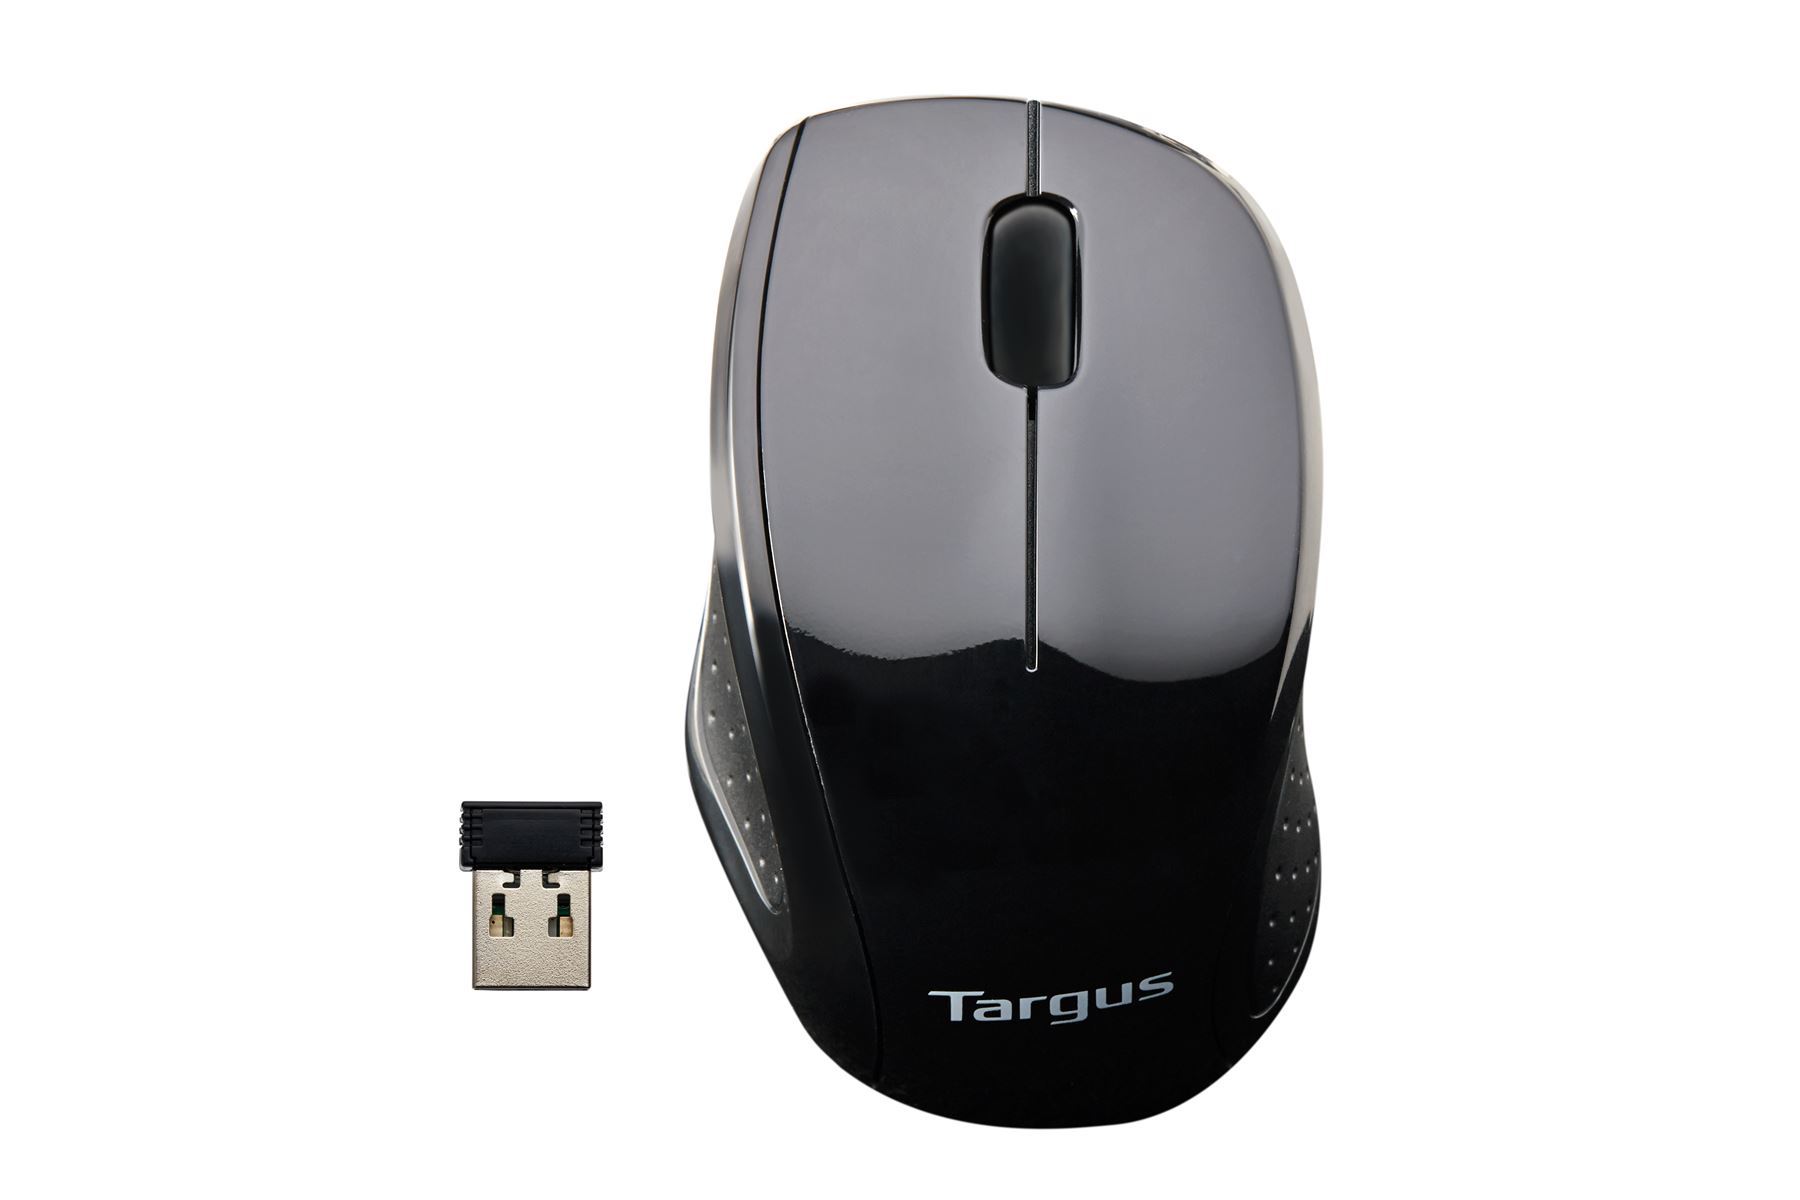 Targus wireless mouse instructions